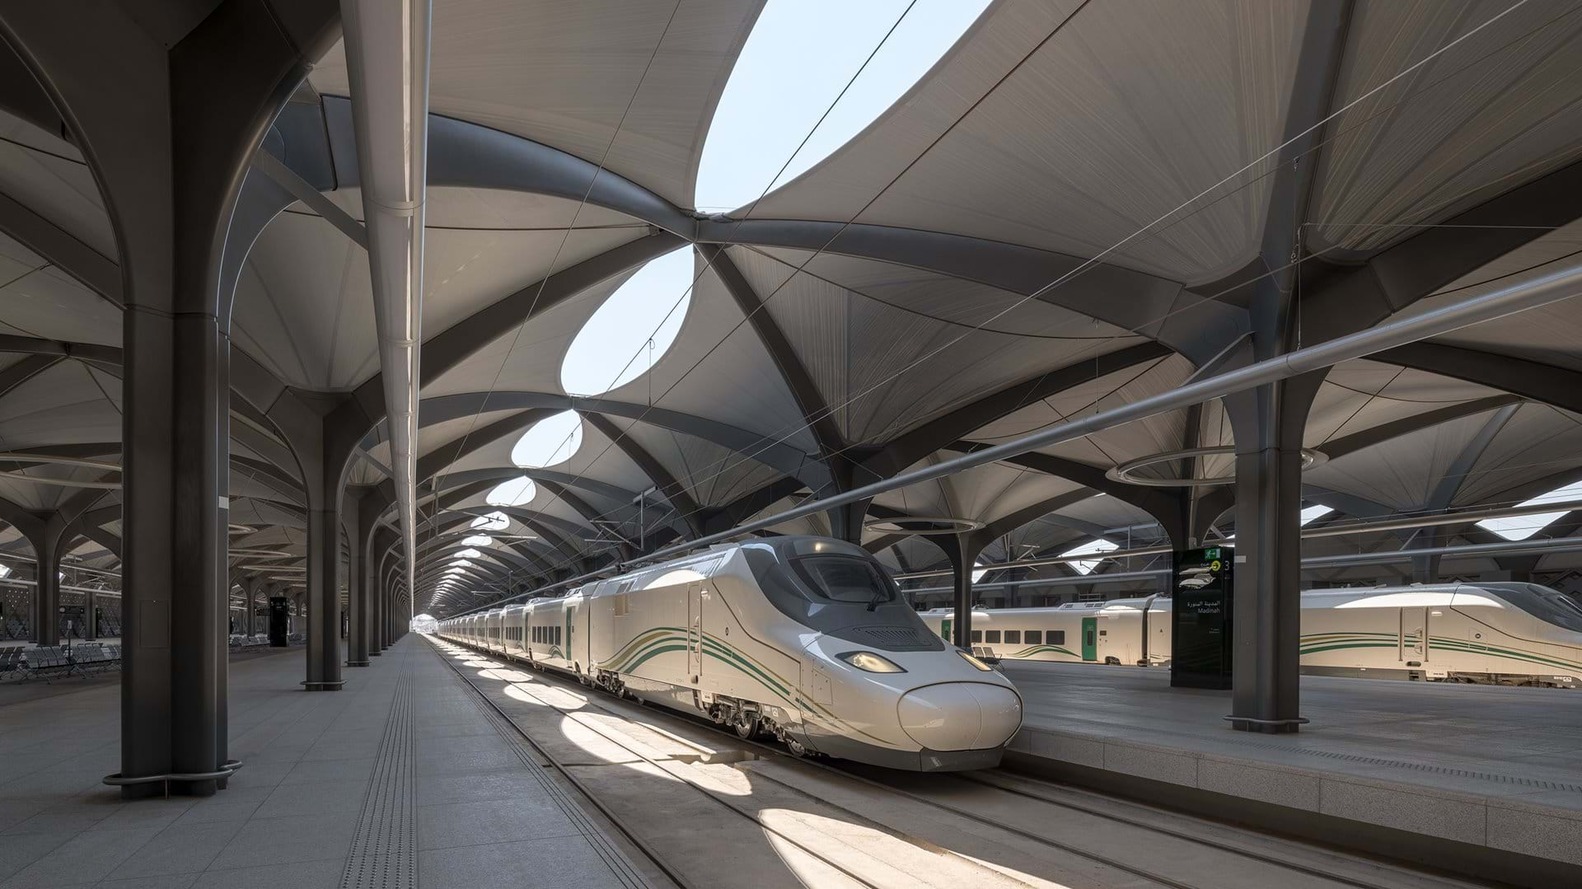 Completed project exhibition series 04 | Haramain High Speed Railway